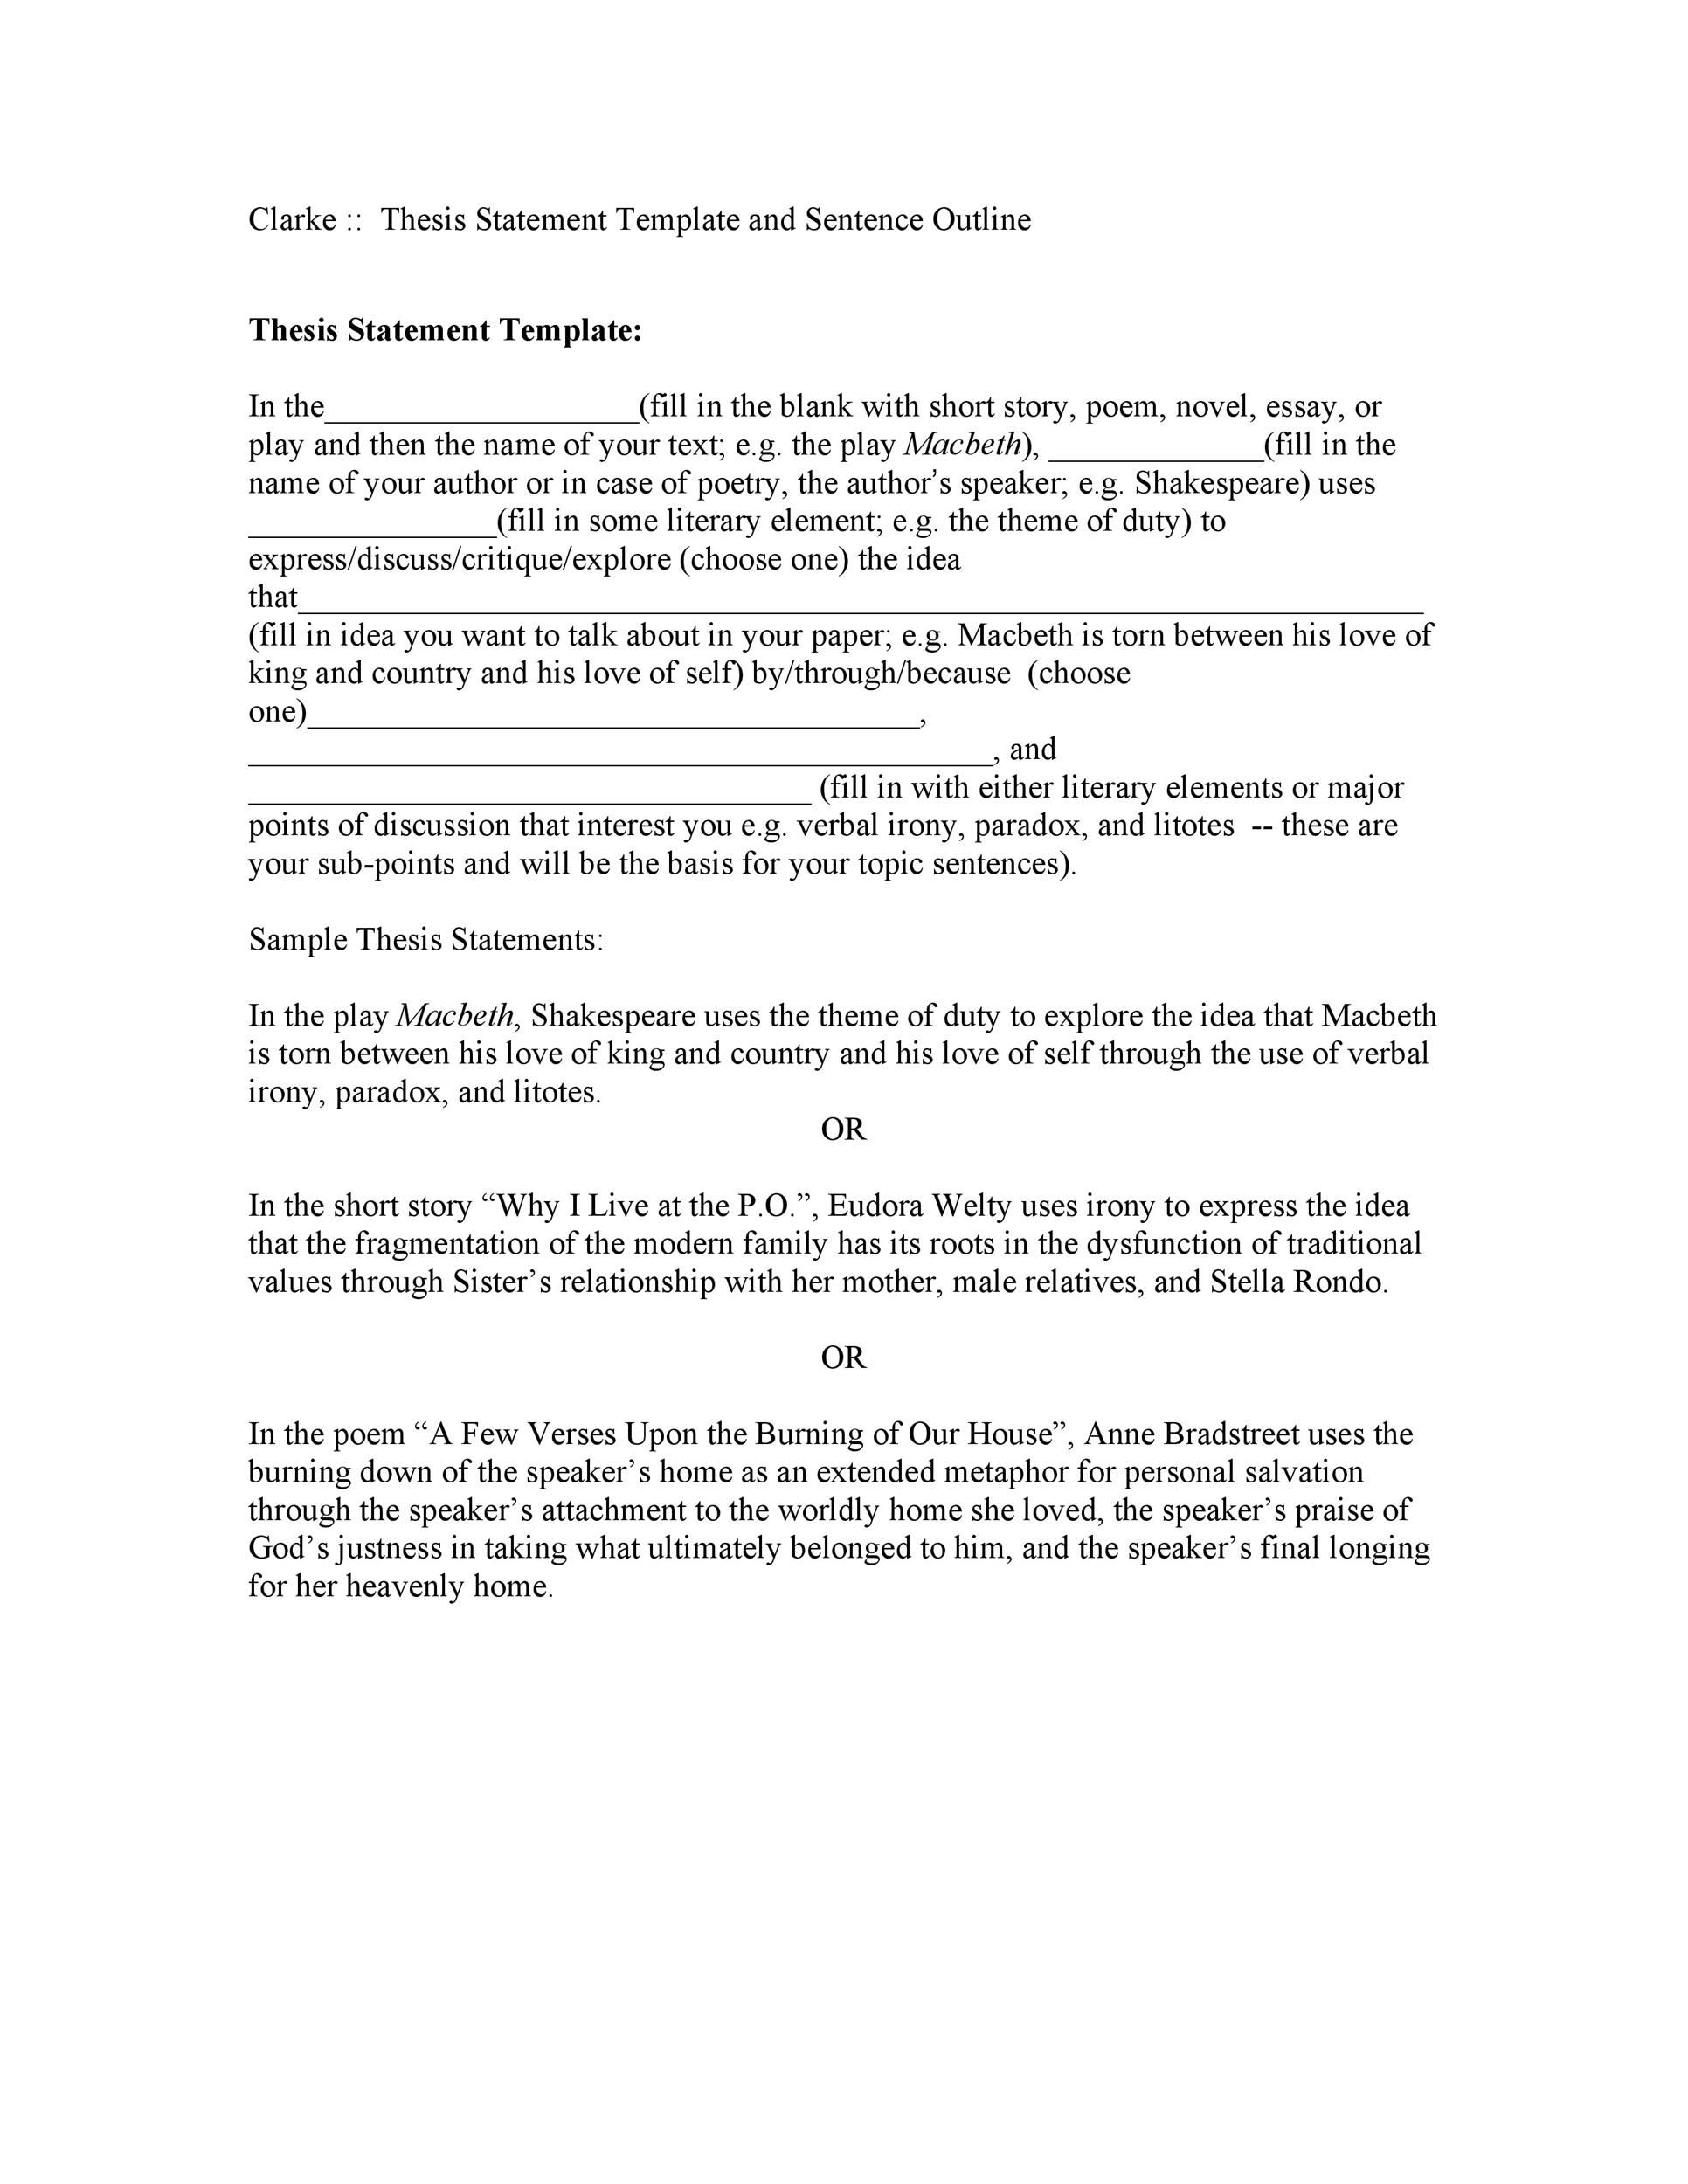 Free thesis statement template 06